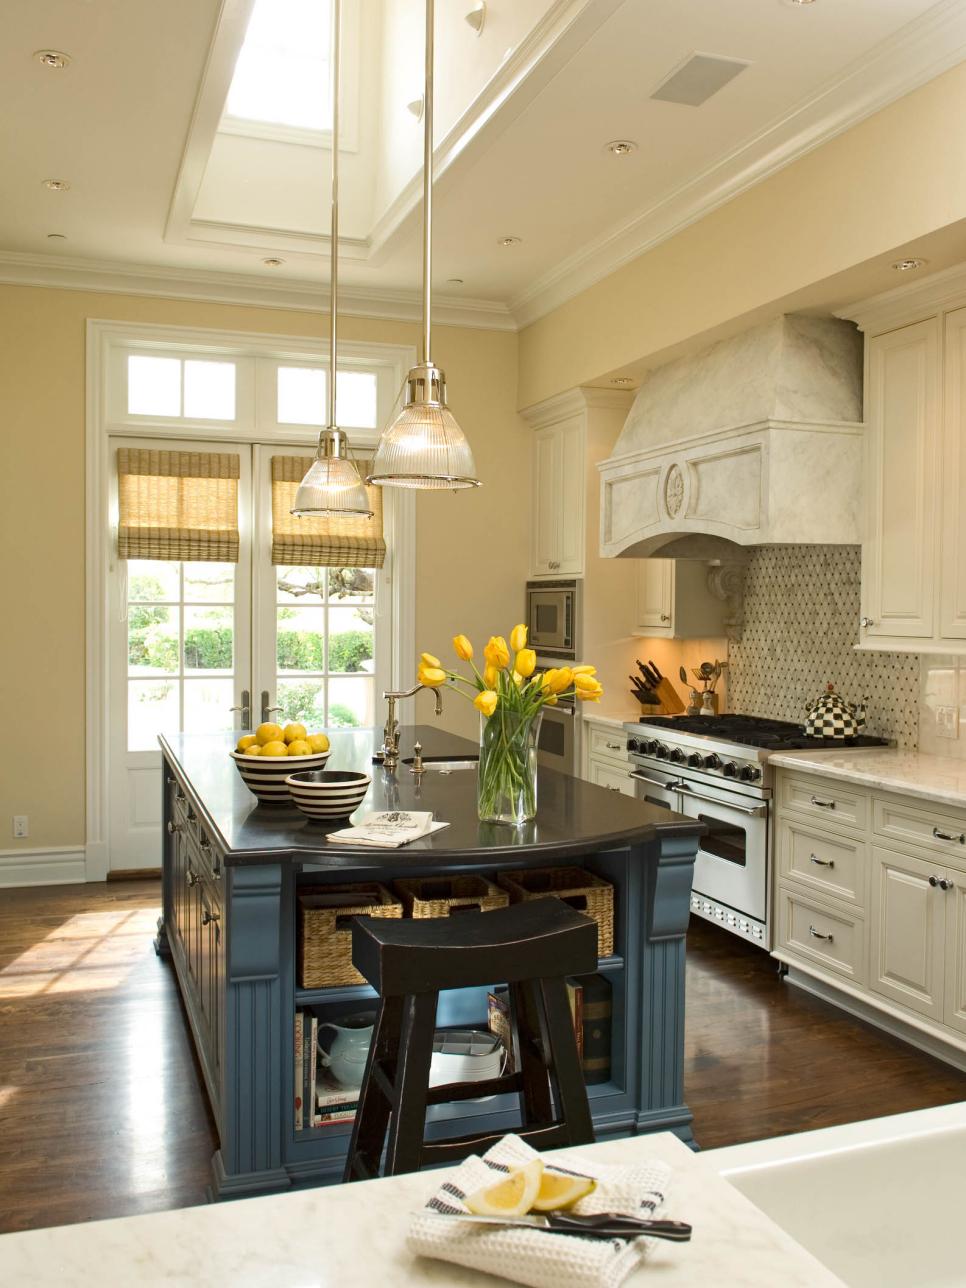 French Country Kitchen With Blue Island and Rustic Range Hood | HGTV